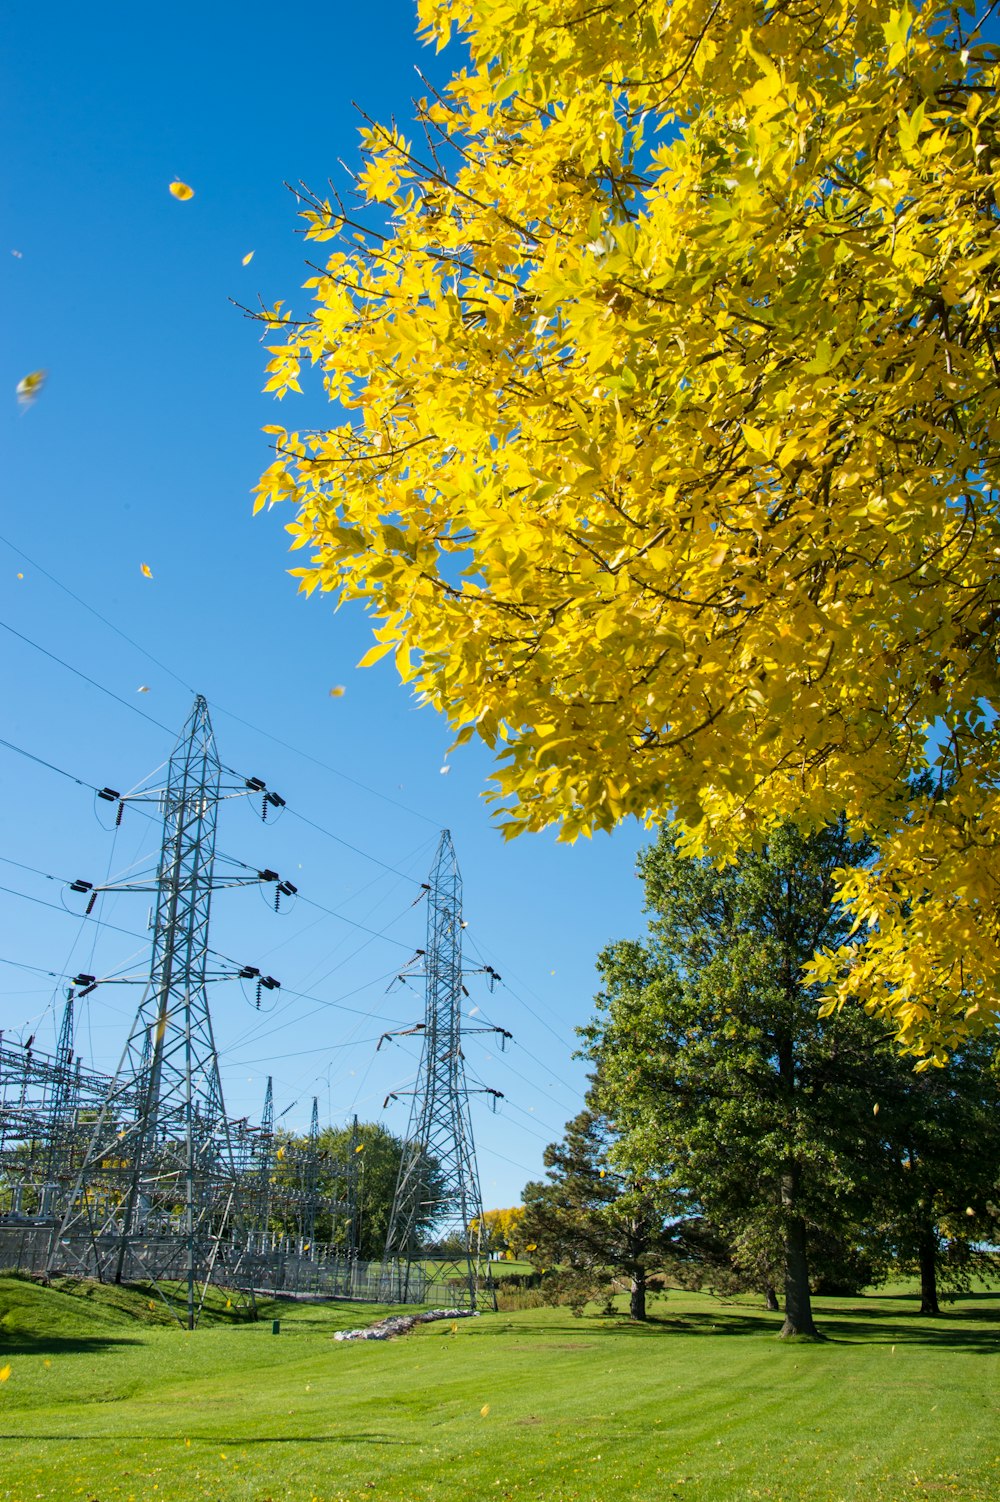 yellow petaled tree on green grass field near cable posts